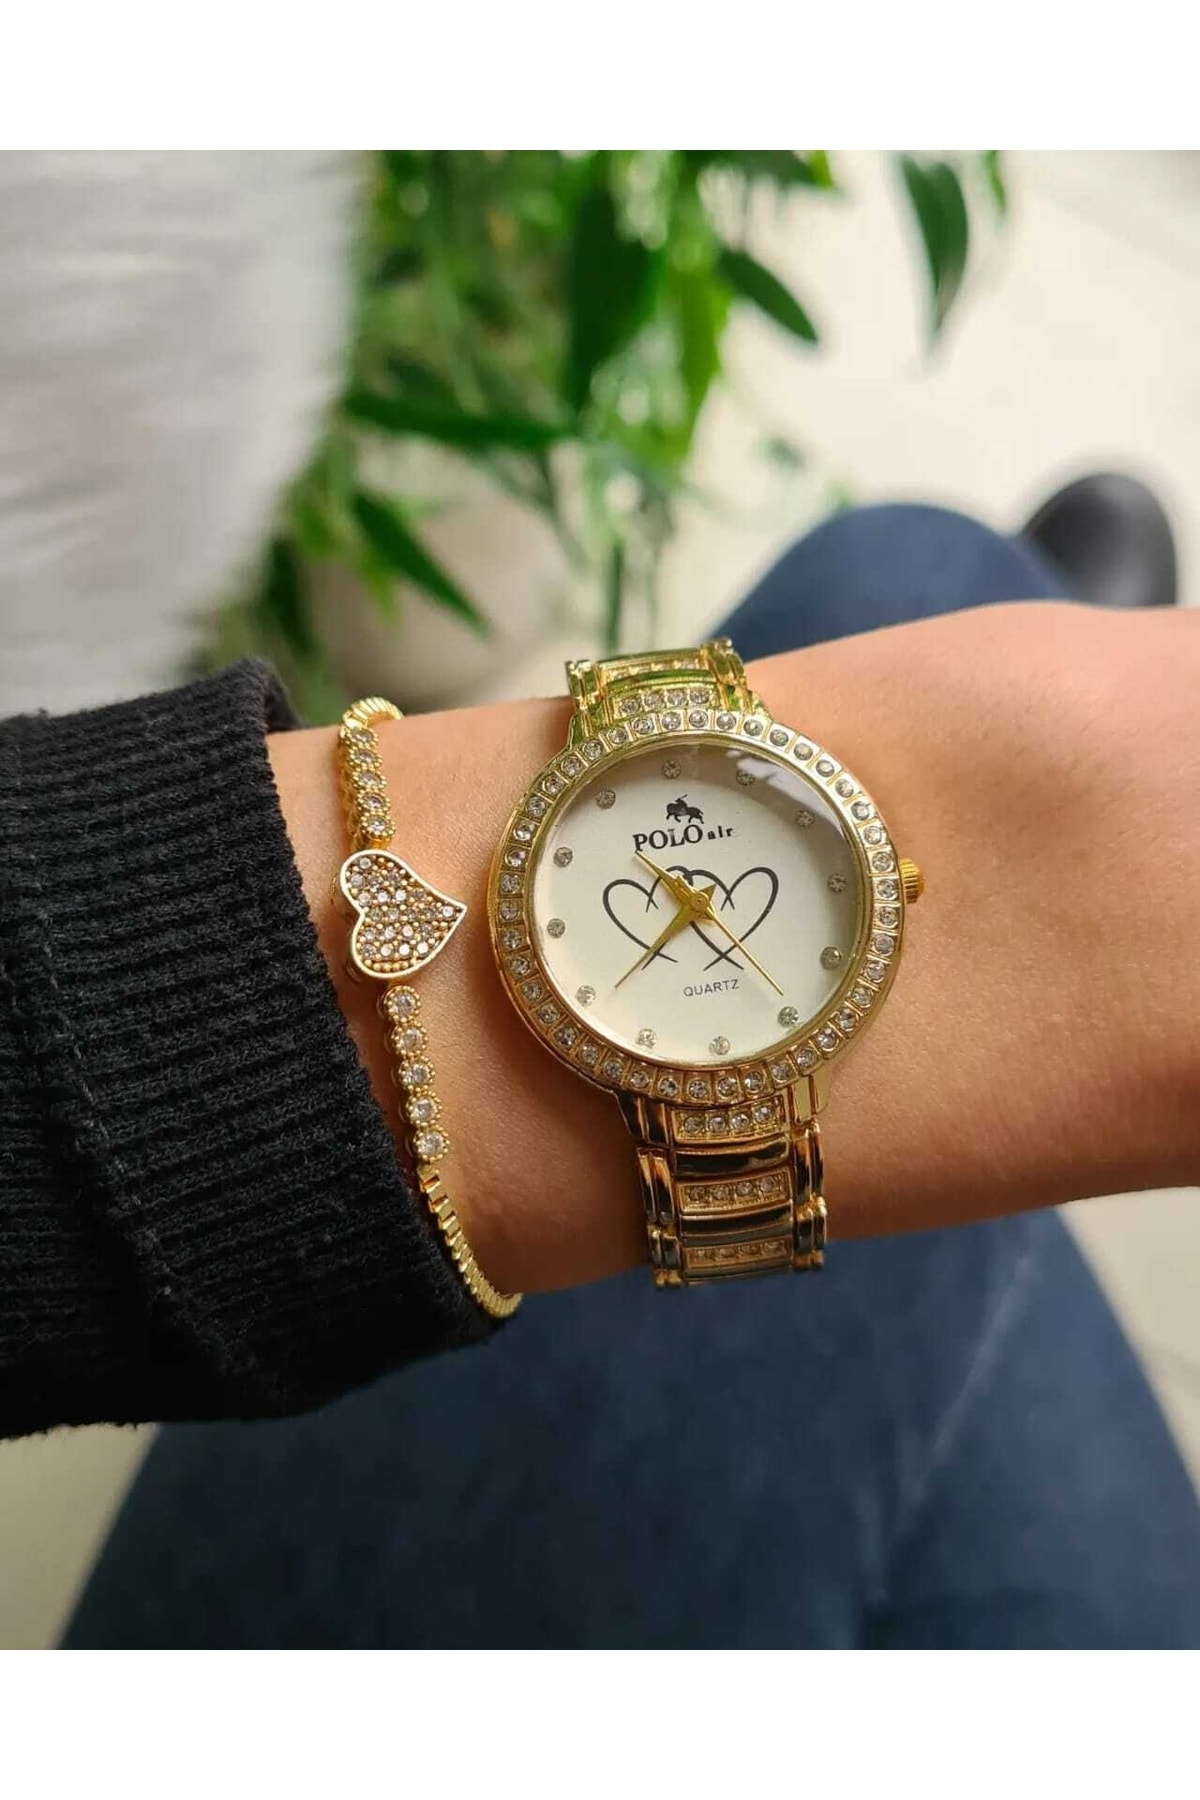 Polo Air Luxury Stone Heart Patterned Women's Wristwatch And Zircon Stone Heart Bracelet Combination Yellow Color